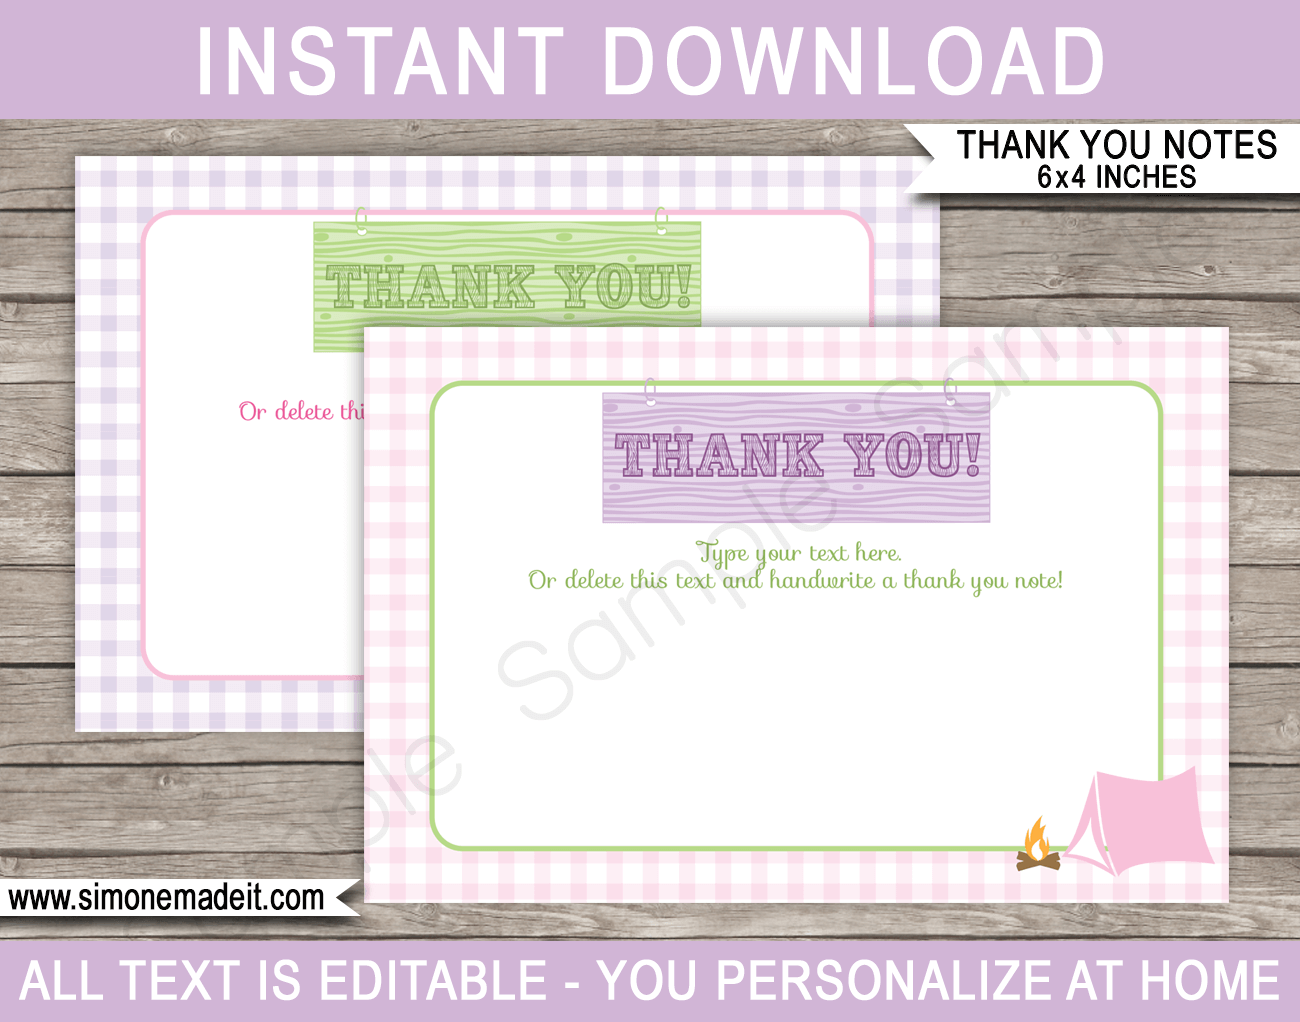 Printable Glamping Party Thank You Cards - Favor Tags - Camping or Glamping Birthday Party theme - Editable Template - Instant Download via simonemadeit.com